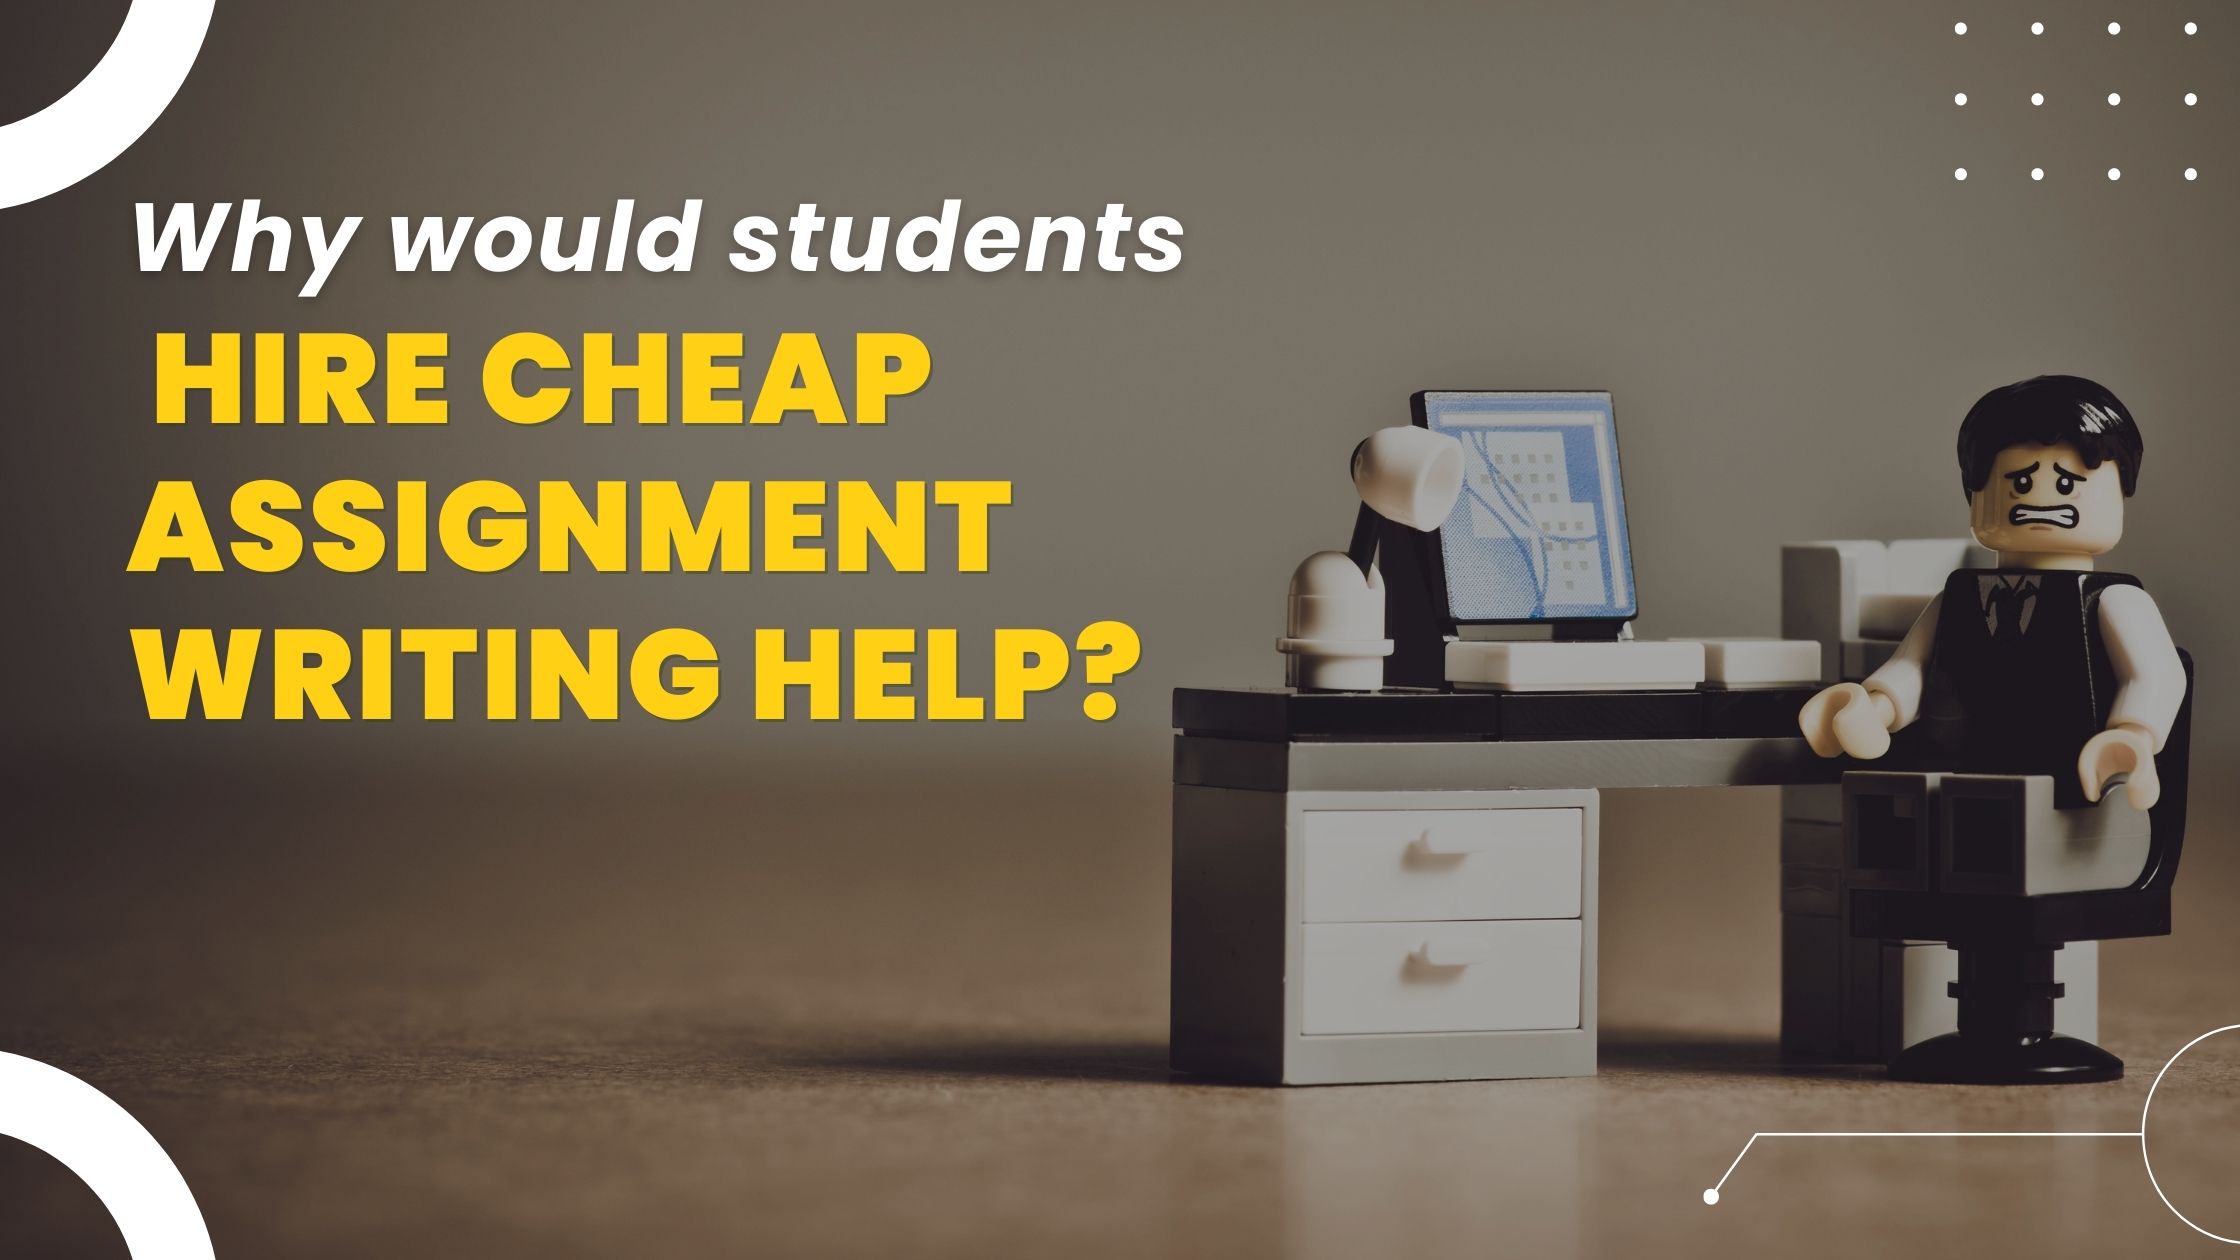 Why would students hire cheap assignment writing help?